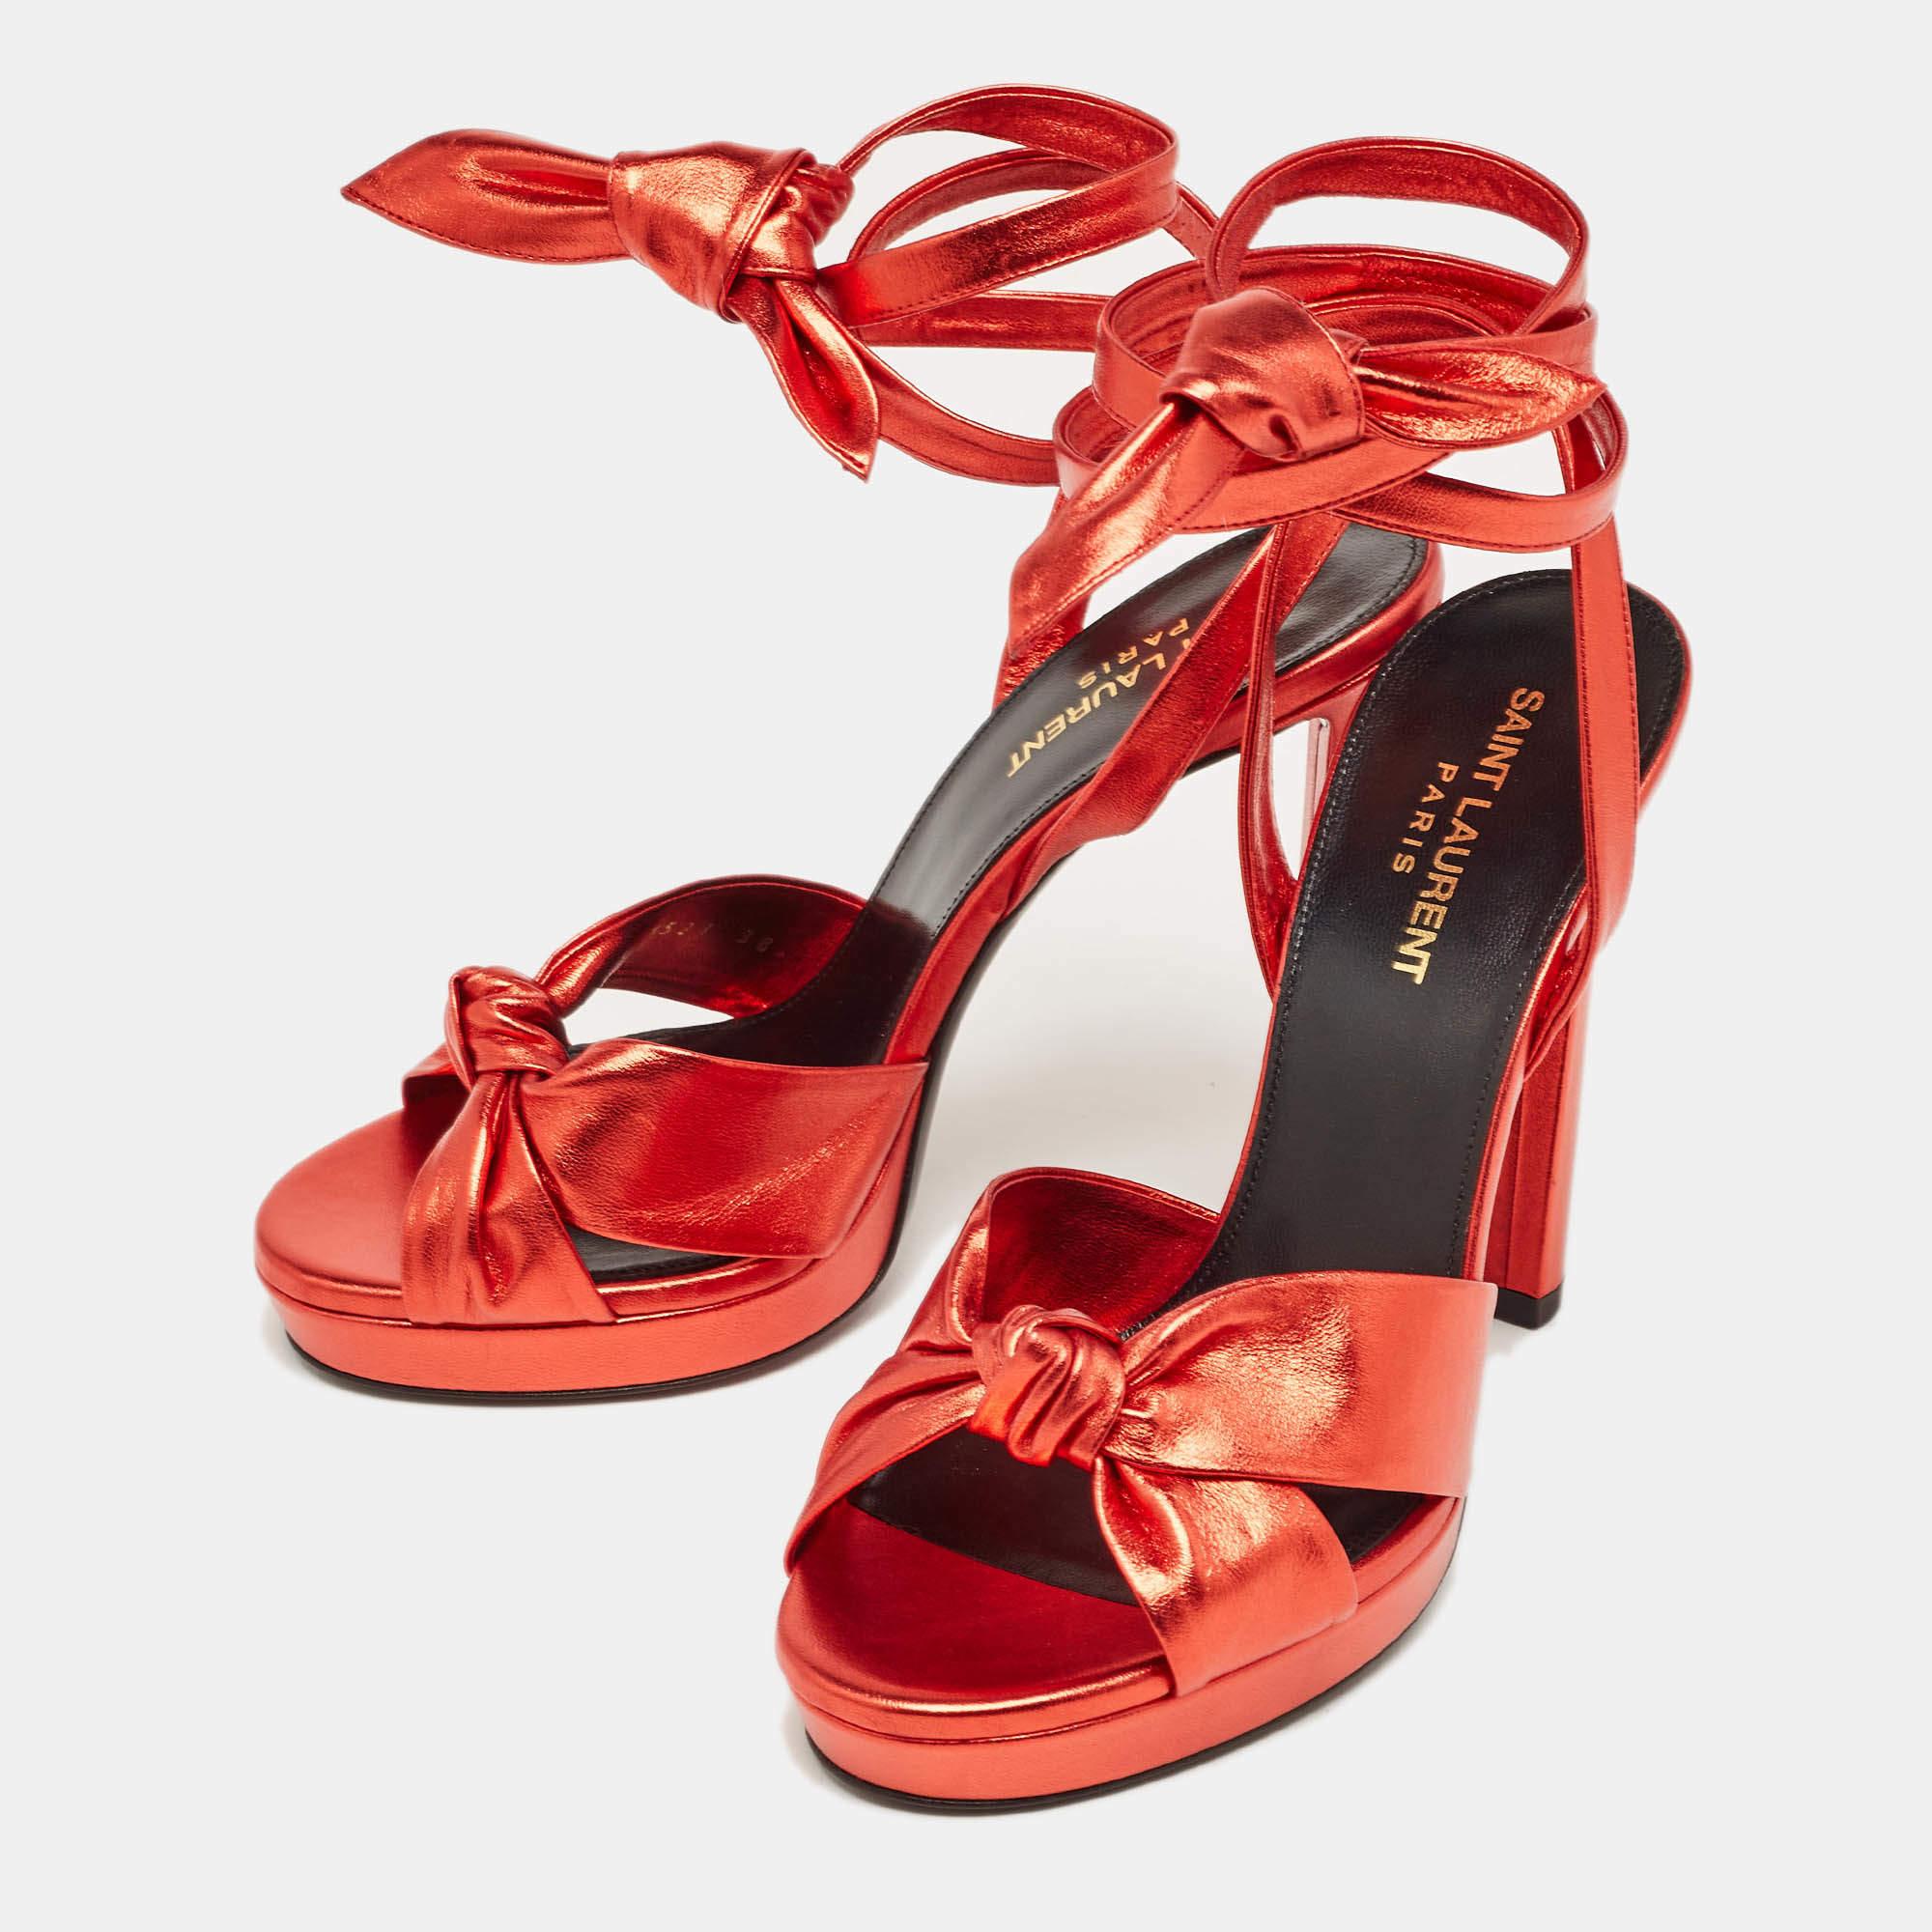 Yves Saint Laurent Red Leather Knotted Ankle Wrap Sandals Size 38 For Sale 3